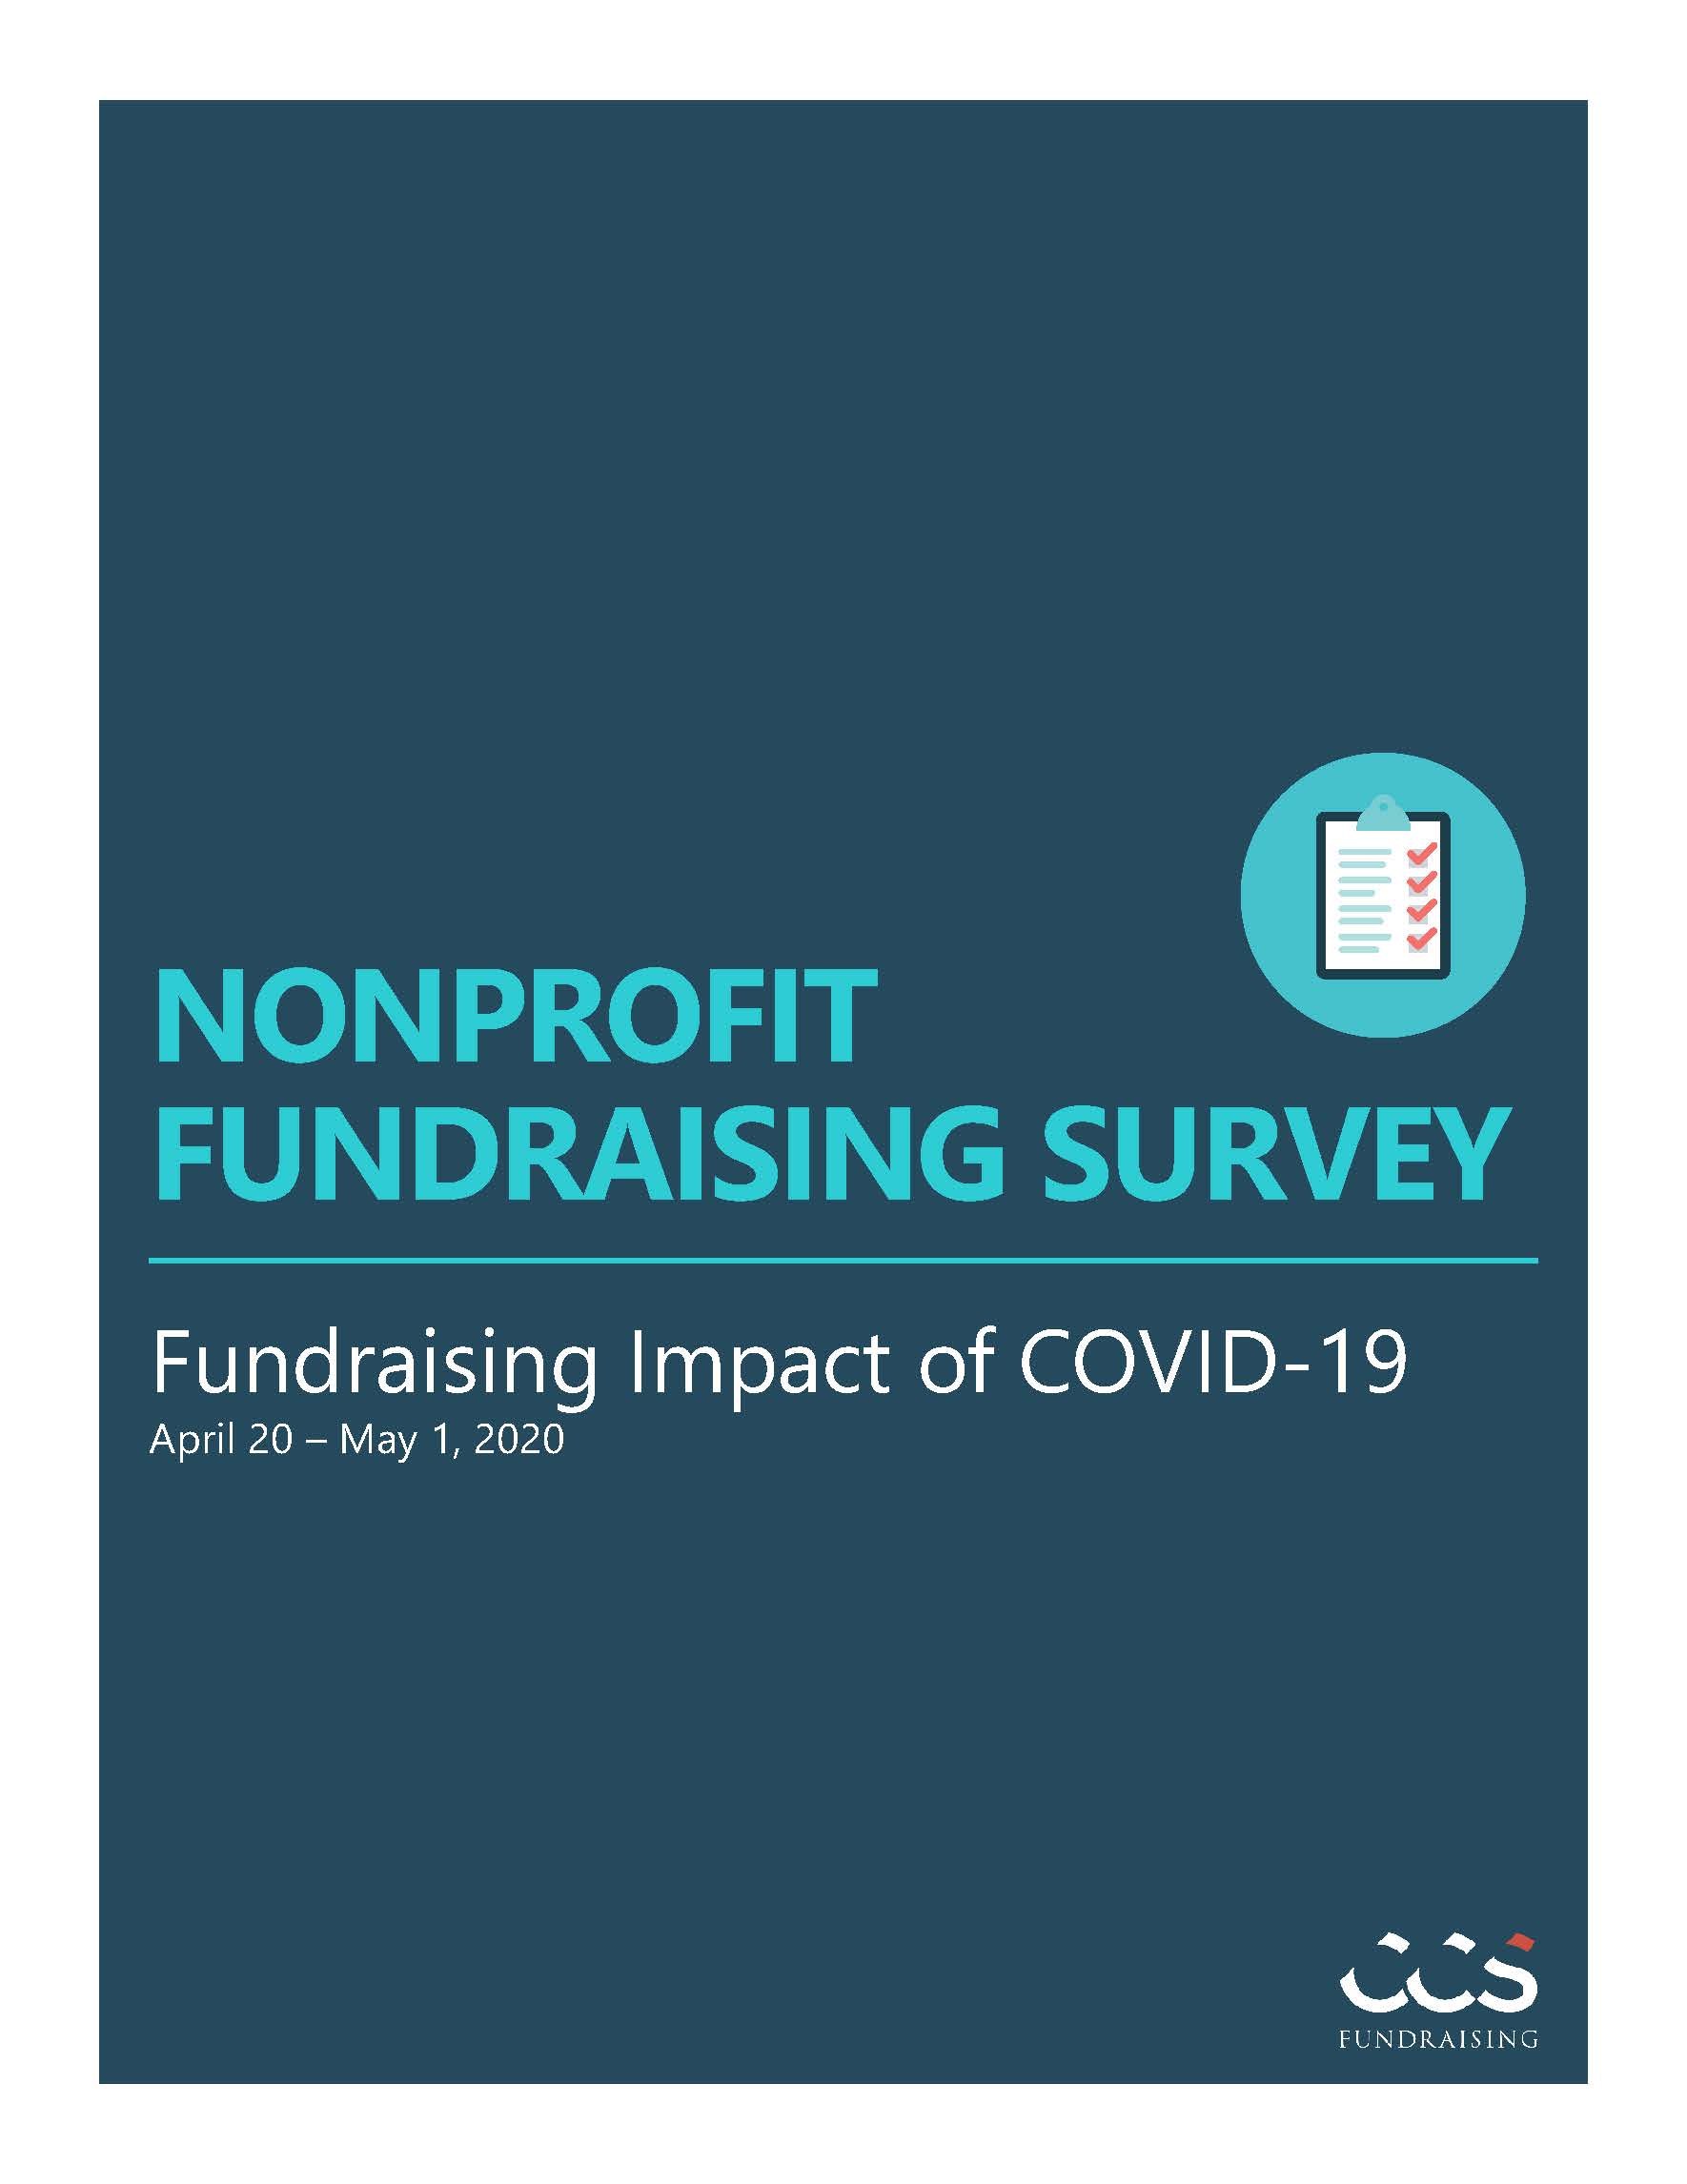 CCS Fundraising Philanthropic Climate Survey Final Report_May 2020_COVER.jpg